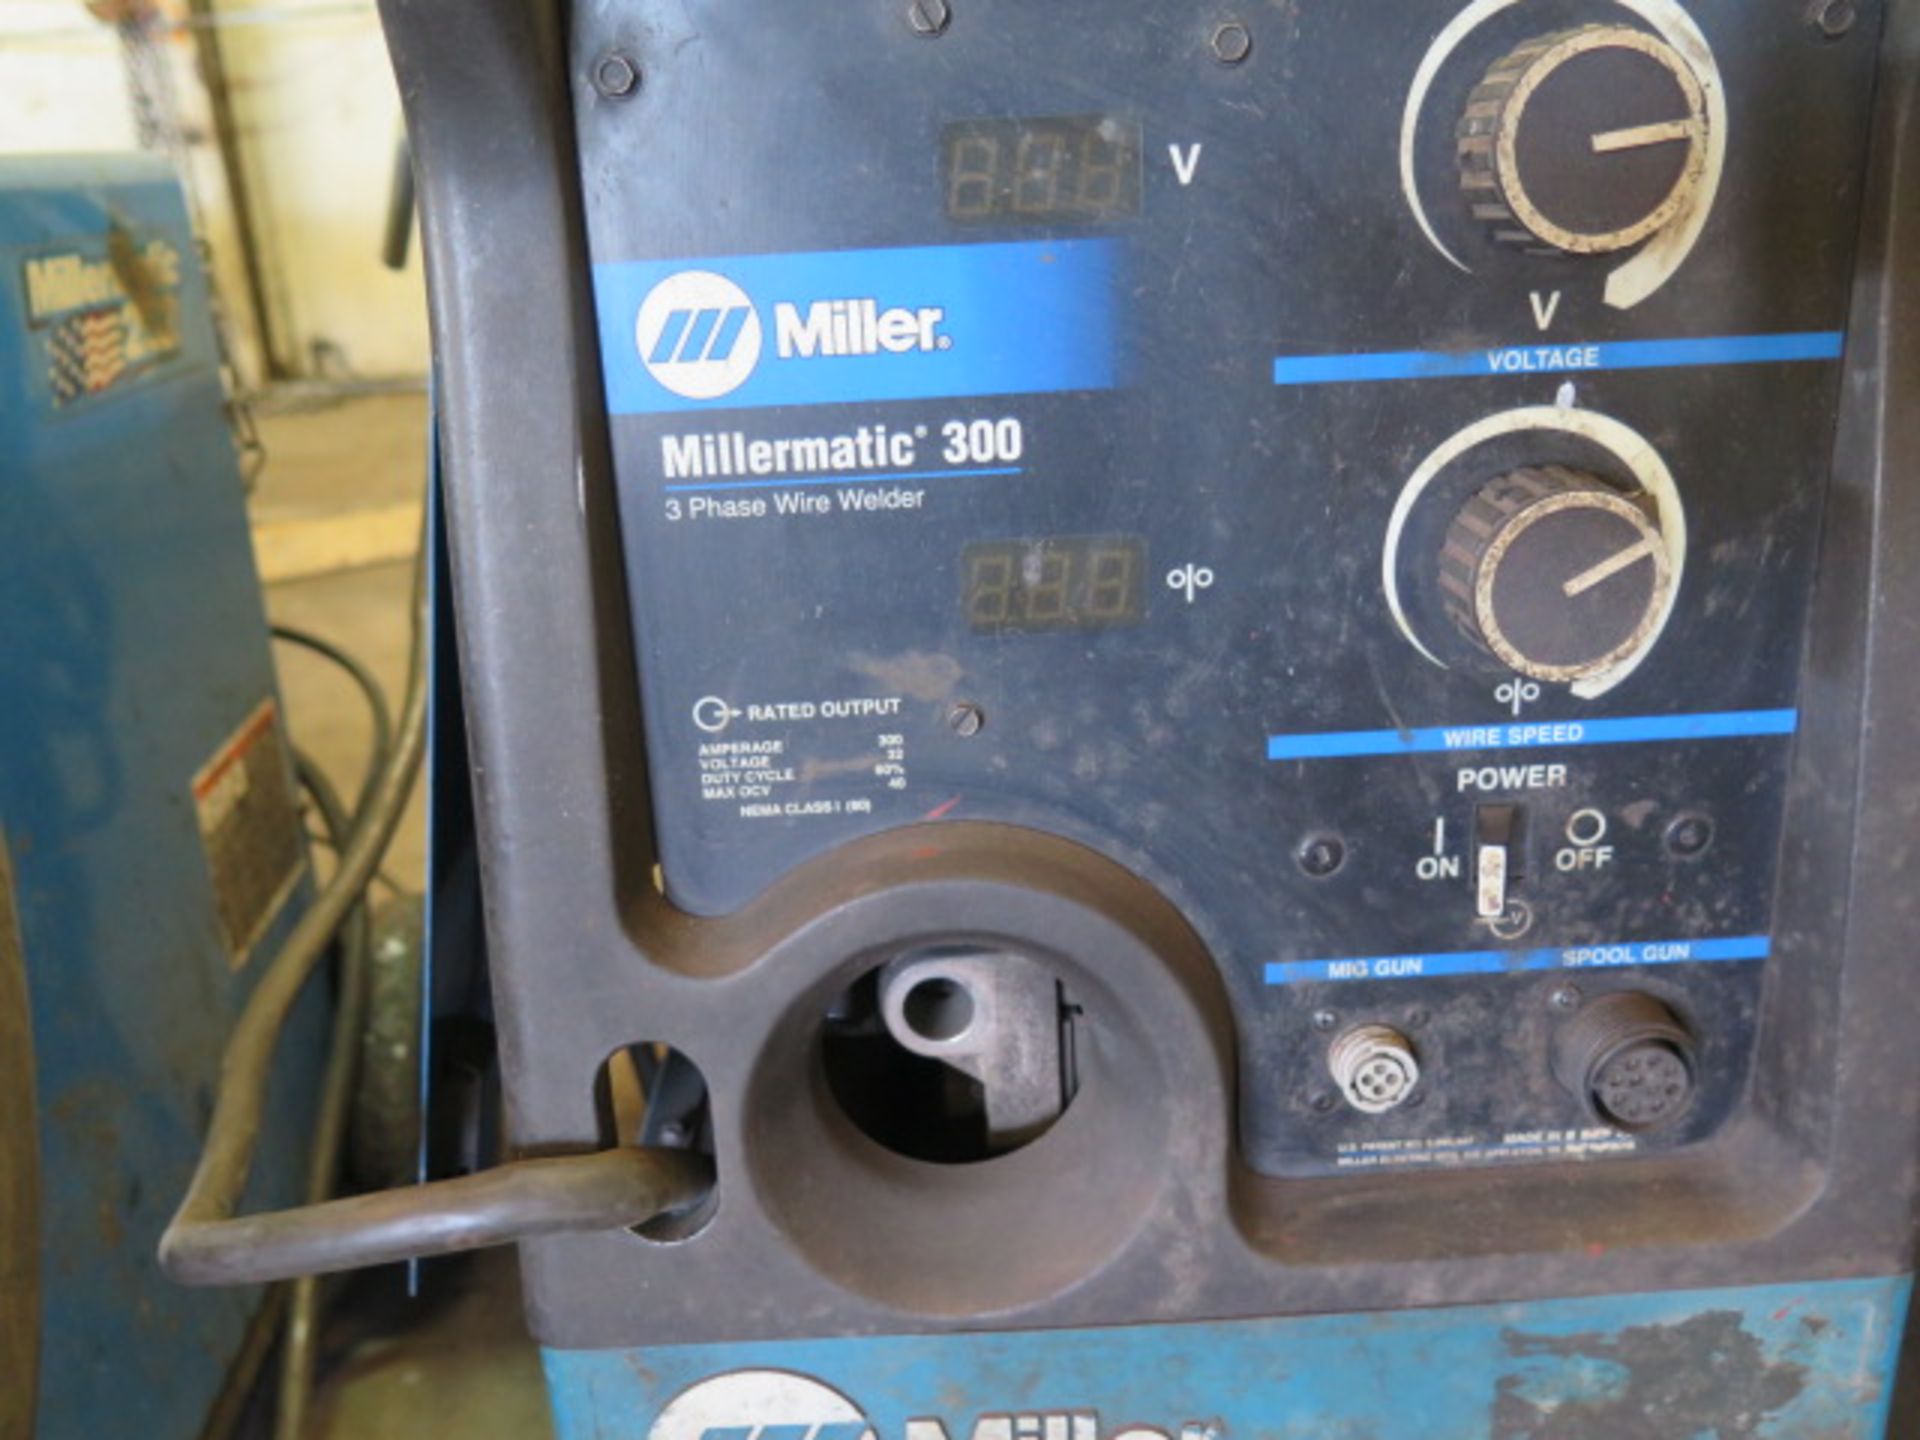 Miller Millermatic 300 Arc Welding Power Source / Wire Feeder (SOLD AS-IS - NO WARRANTY) - Image 5 of 6